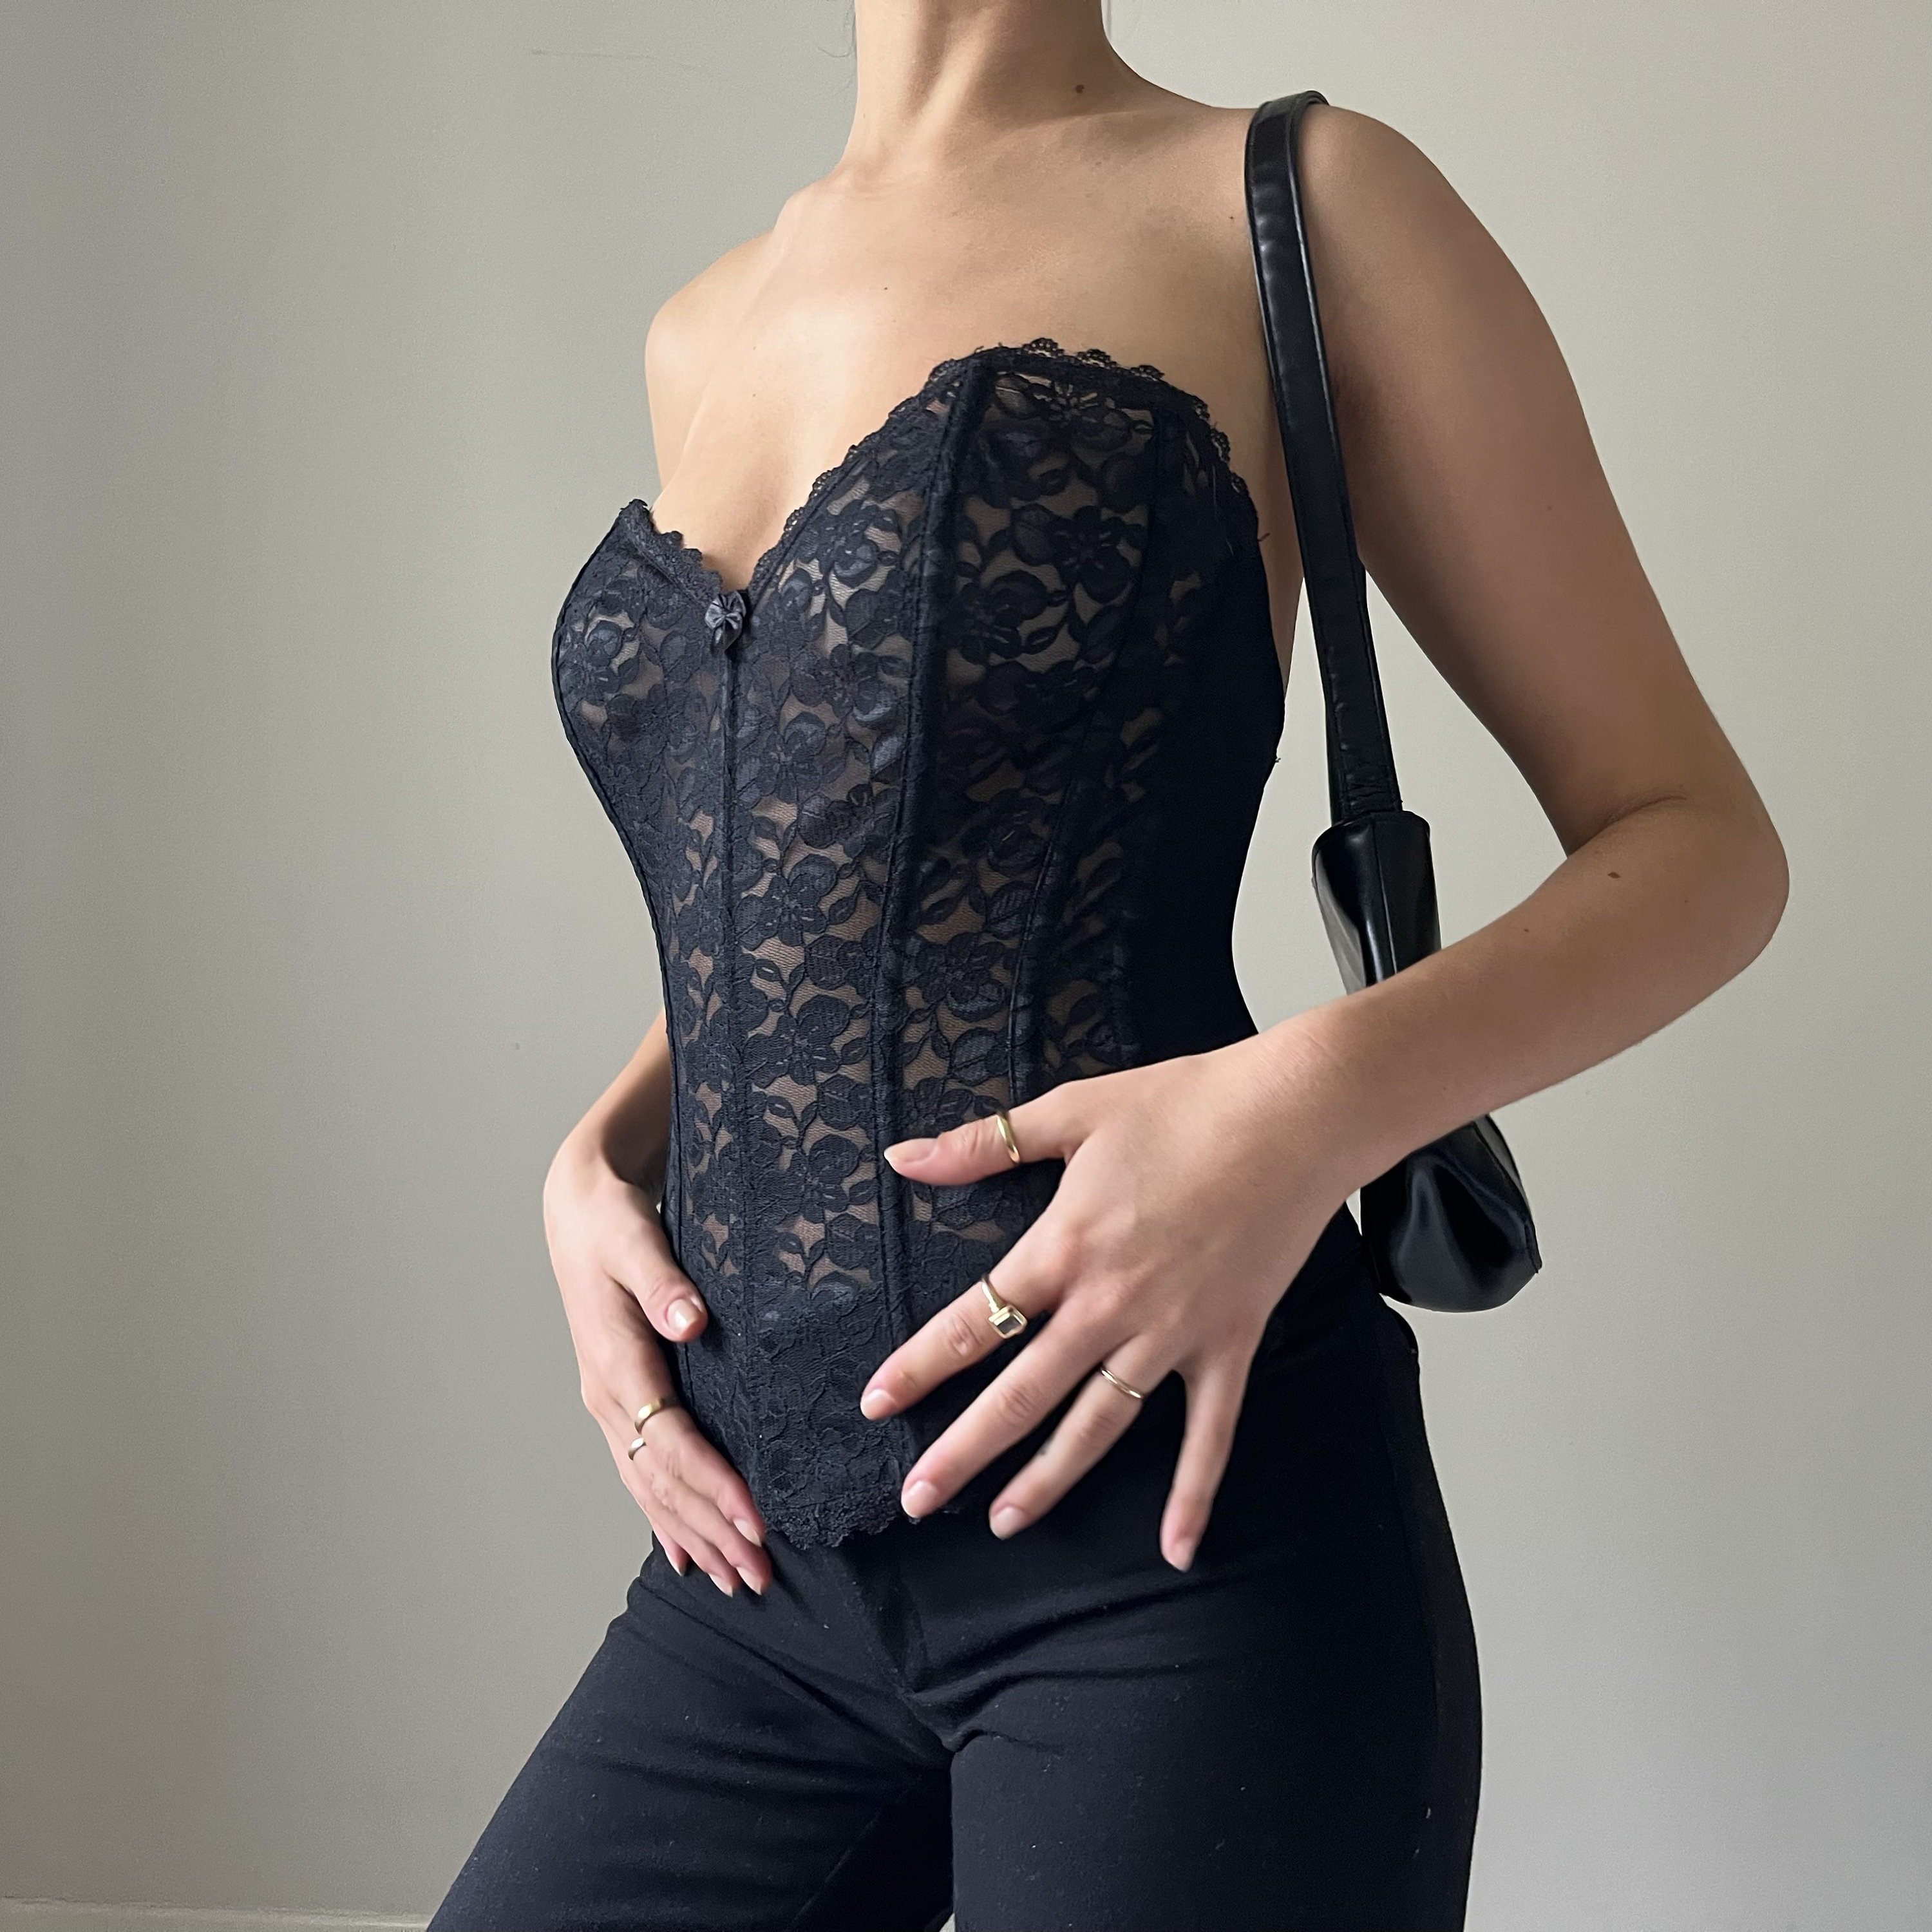 Black Strapless Corset Bustier /black Sleeve Corset Bustier /business Woman  Office Bustier / Corset Bustier With Different Sleeve Options 